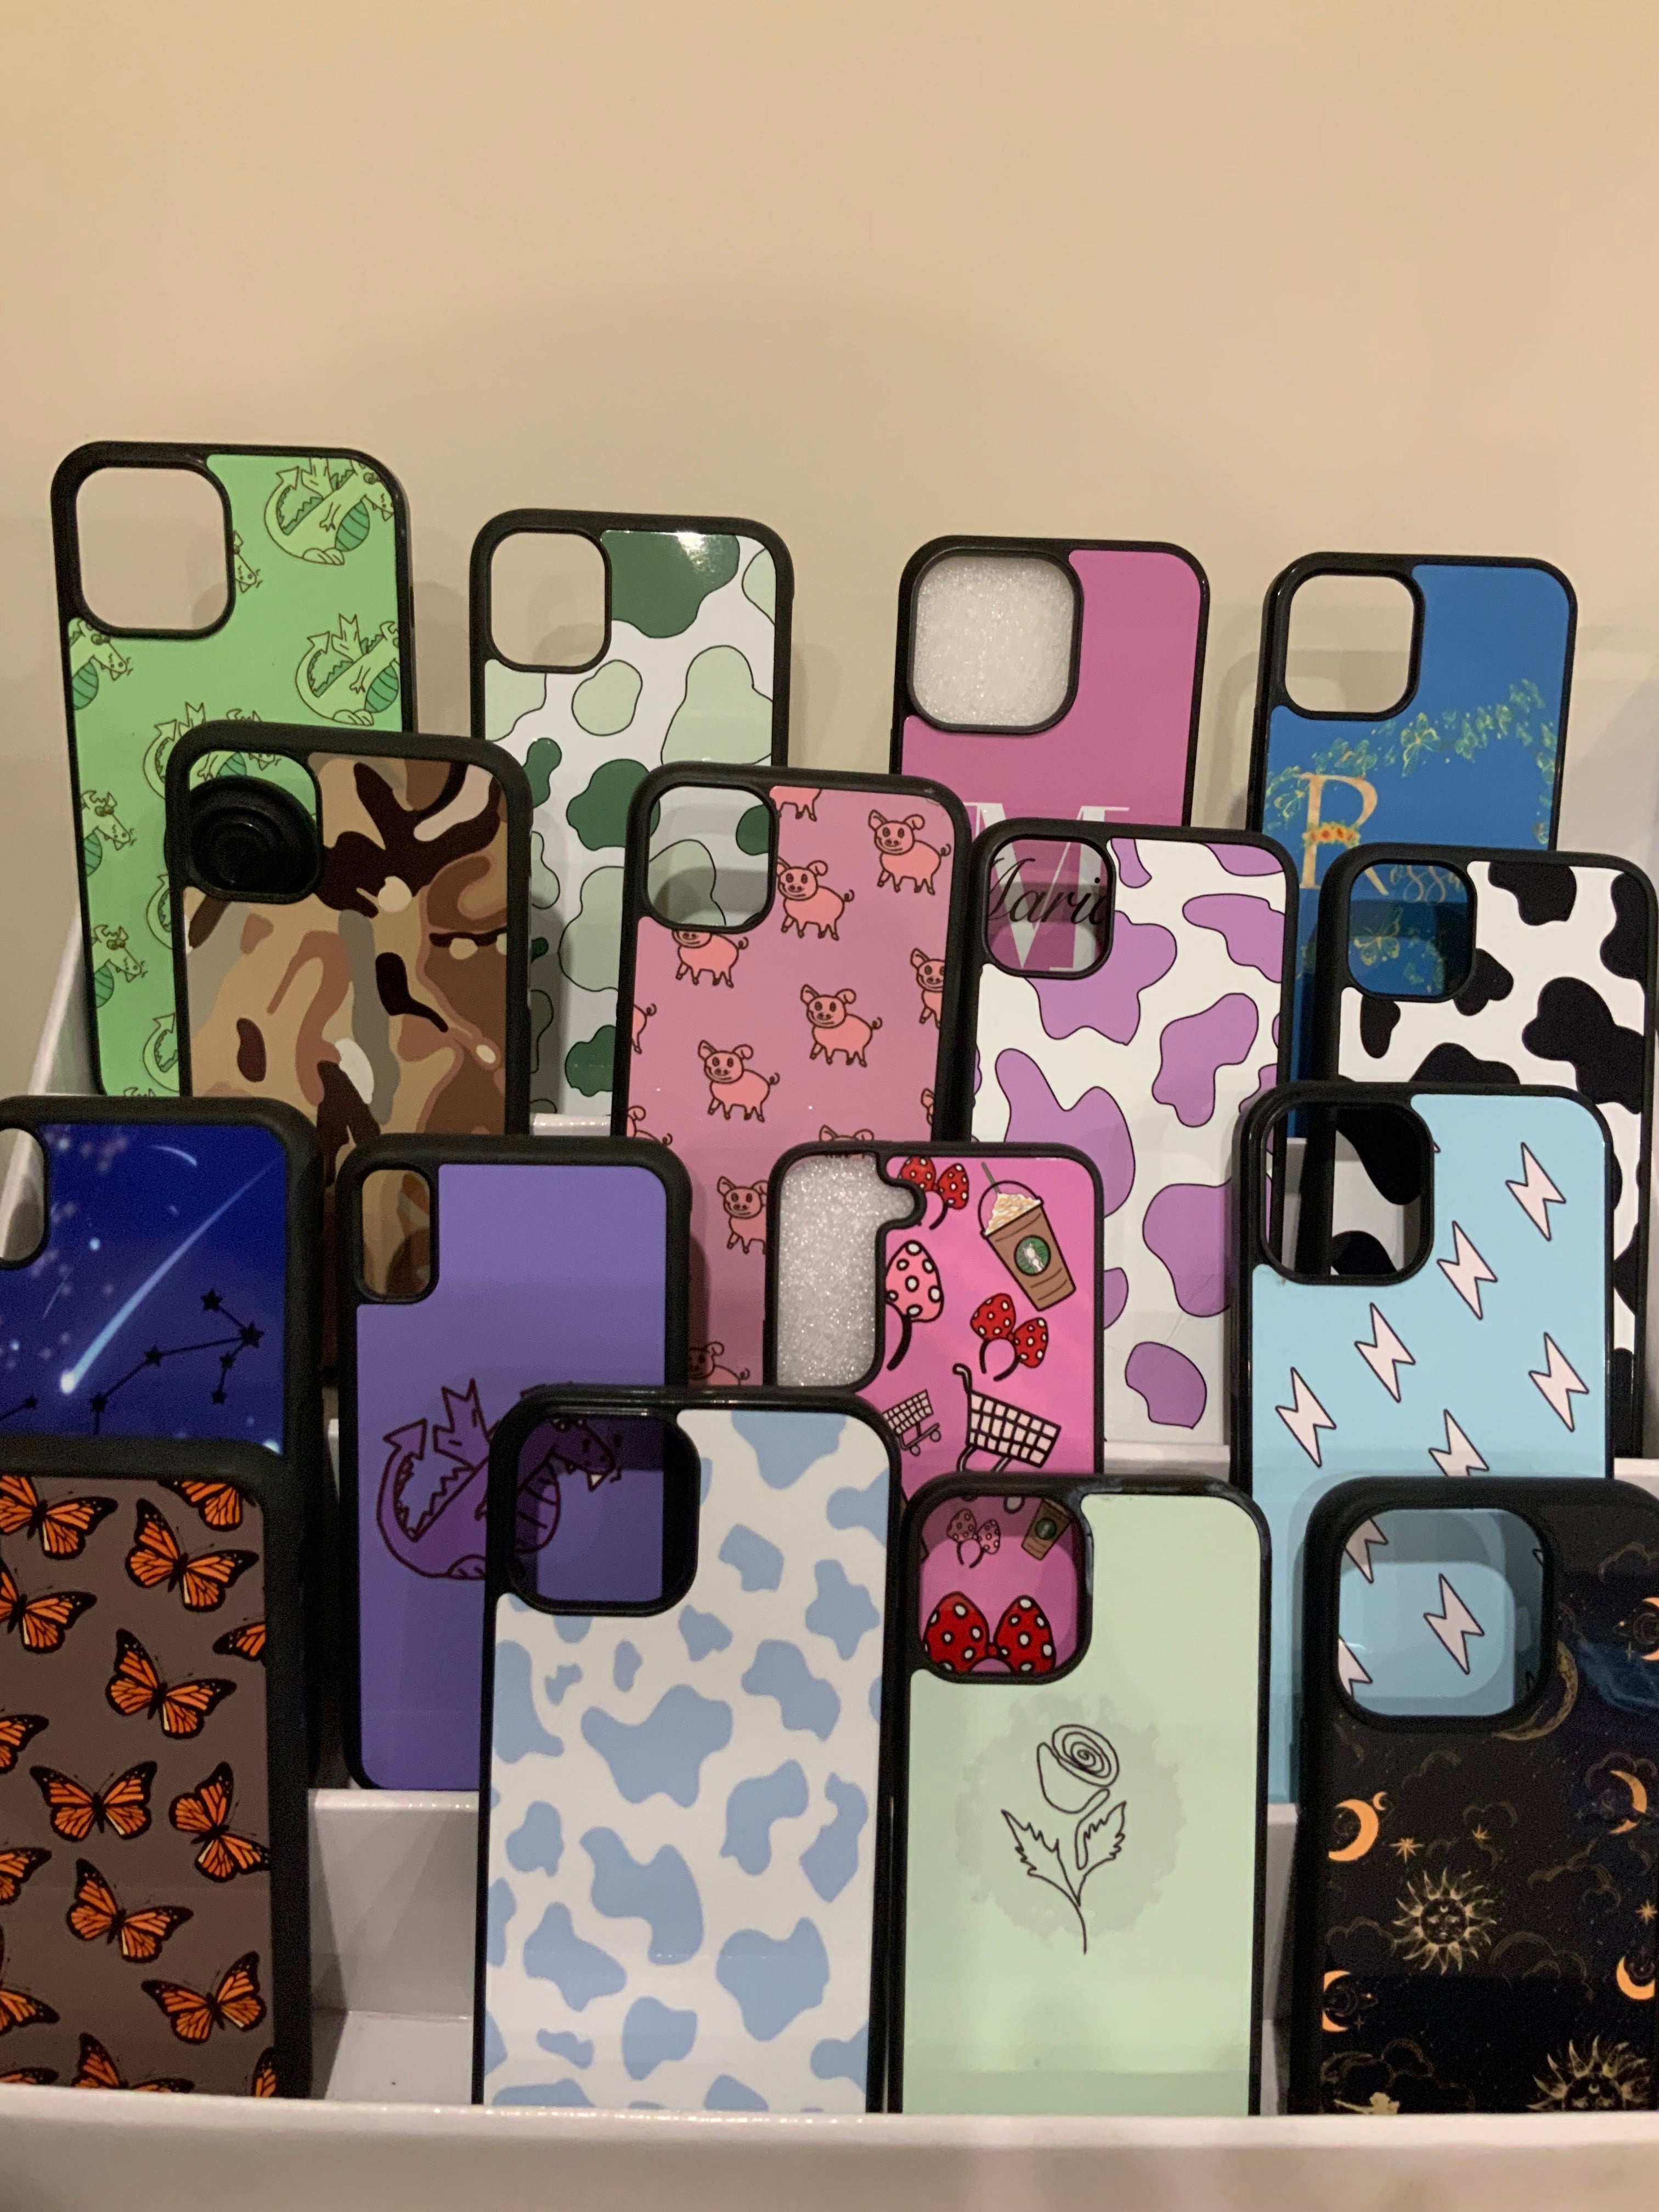 iphone cases with various patterns and images of animal print , floral and custom names